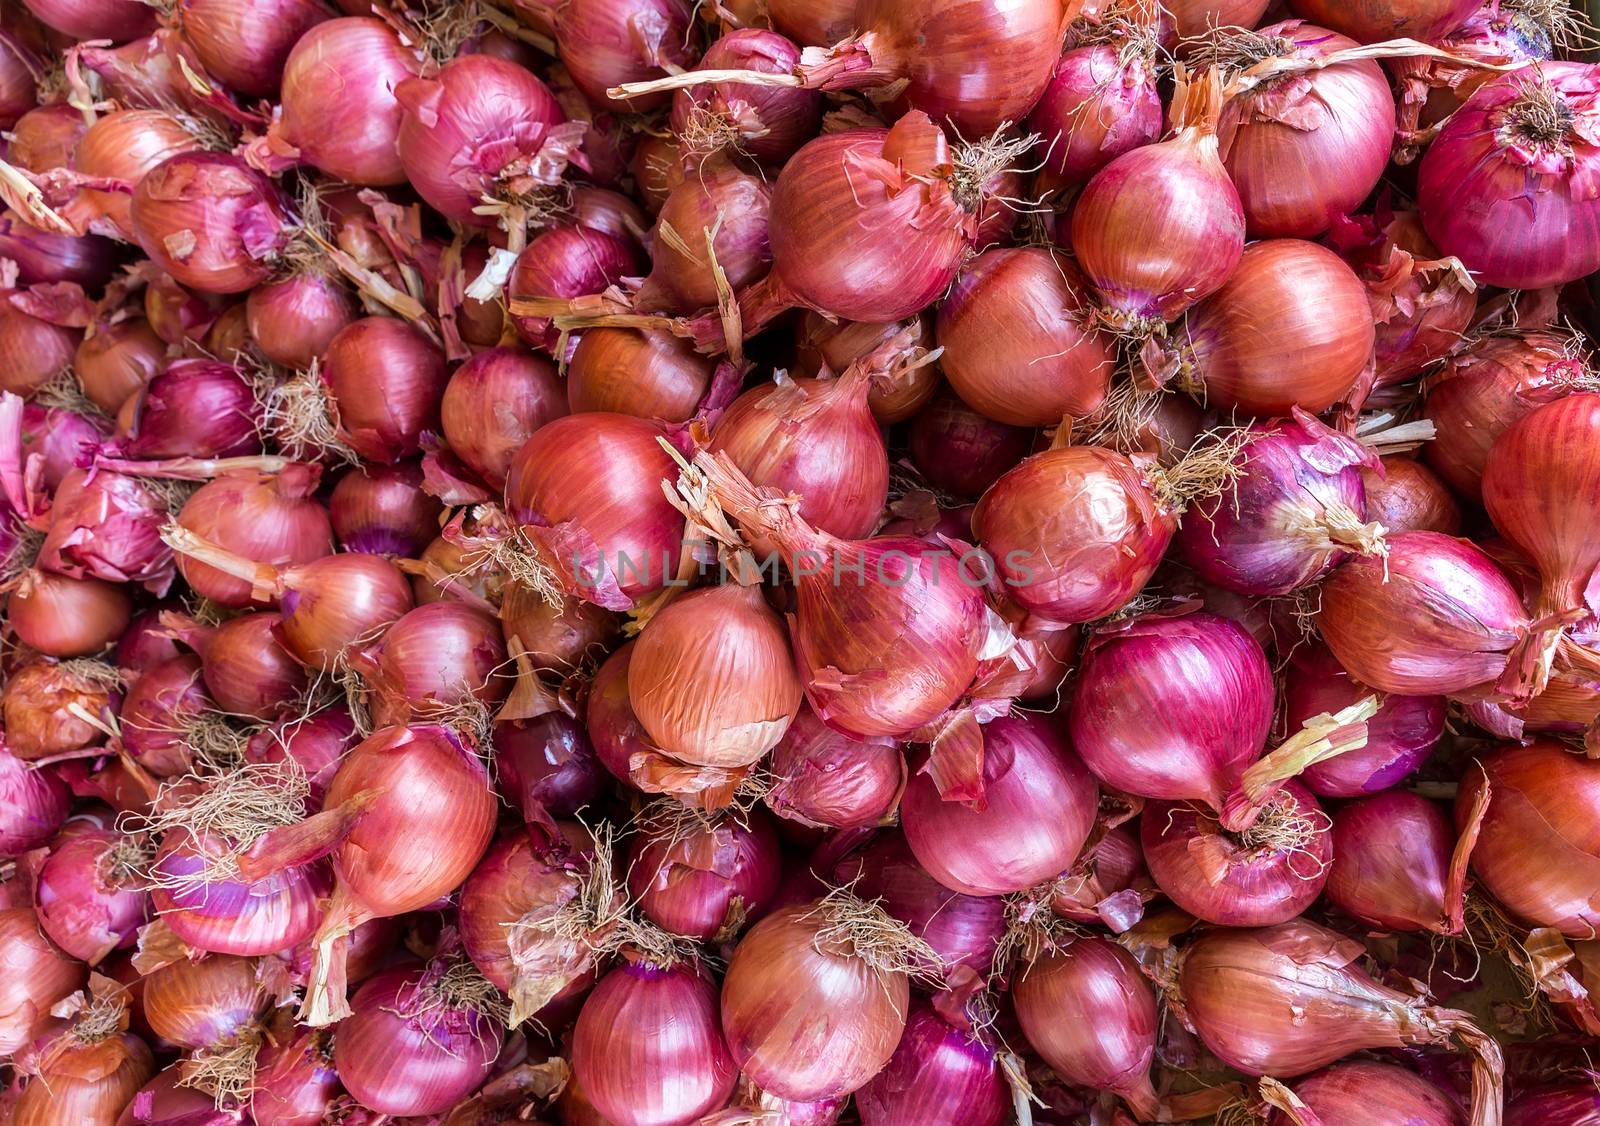 Heap of red onions on market by BenSchonewille